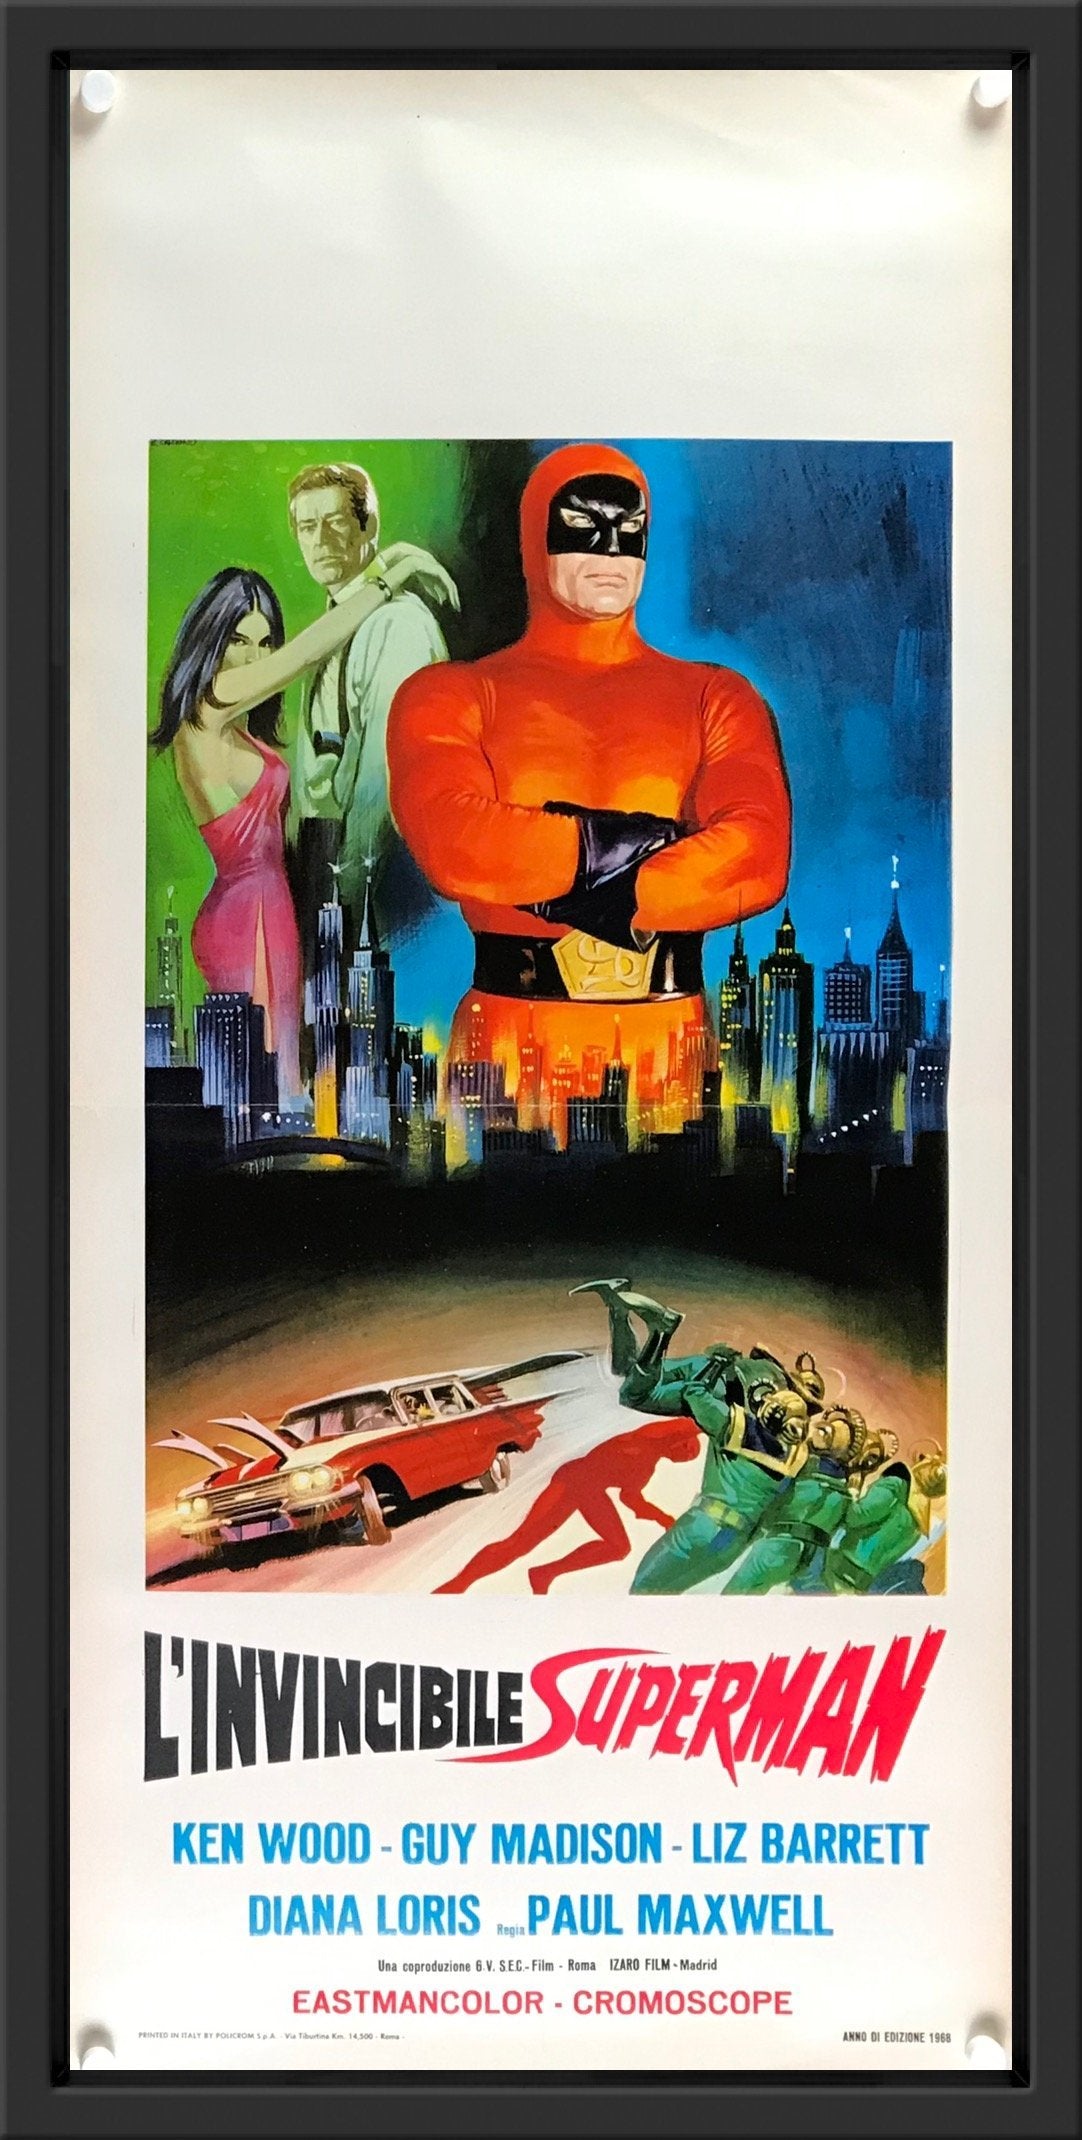 An original movie poster for Argo and The Faceless Giants (L'Invincible Superman)